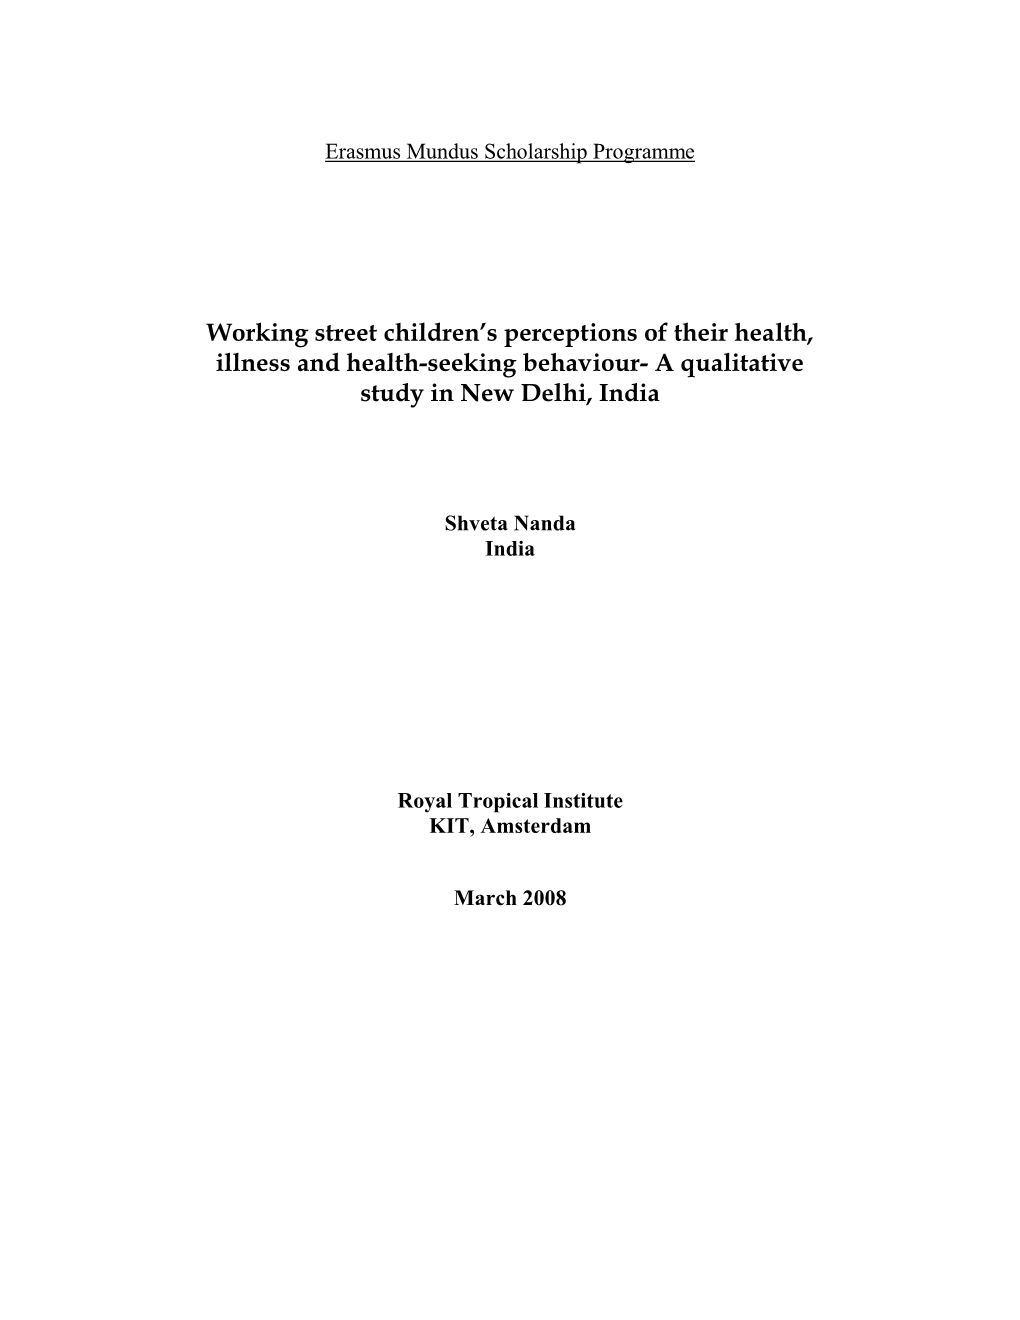 Working Street Children's Perceptions of Their Health, Illness and Health